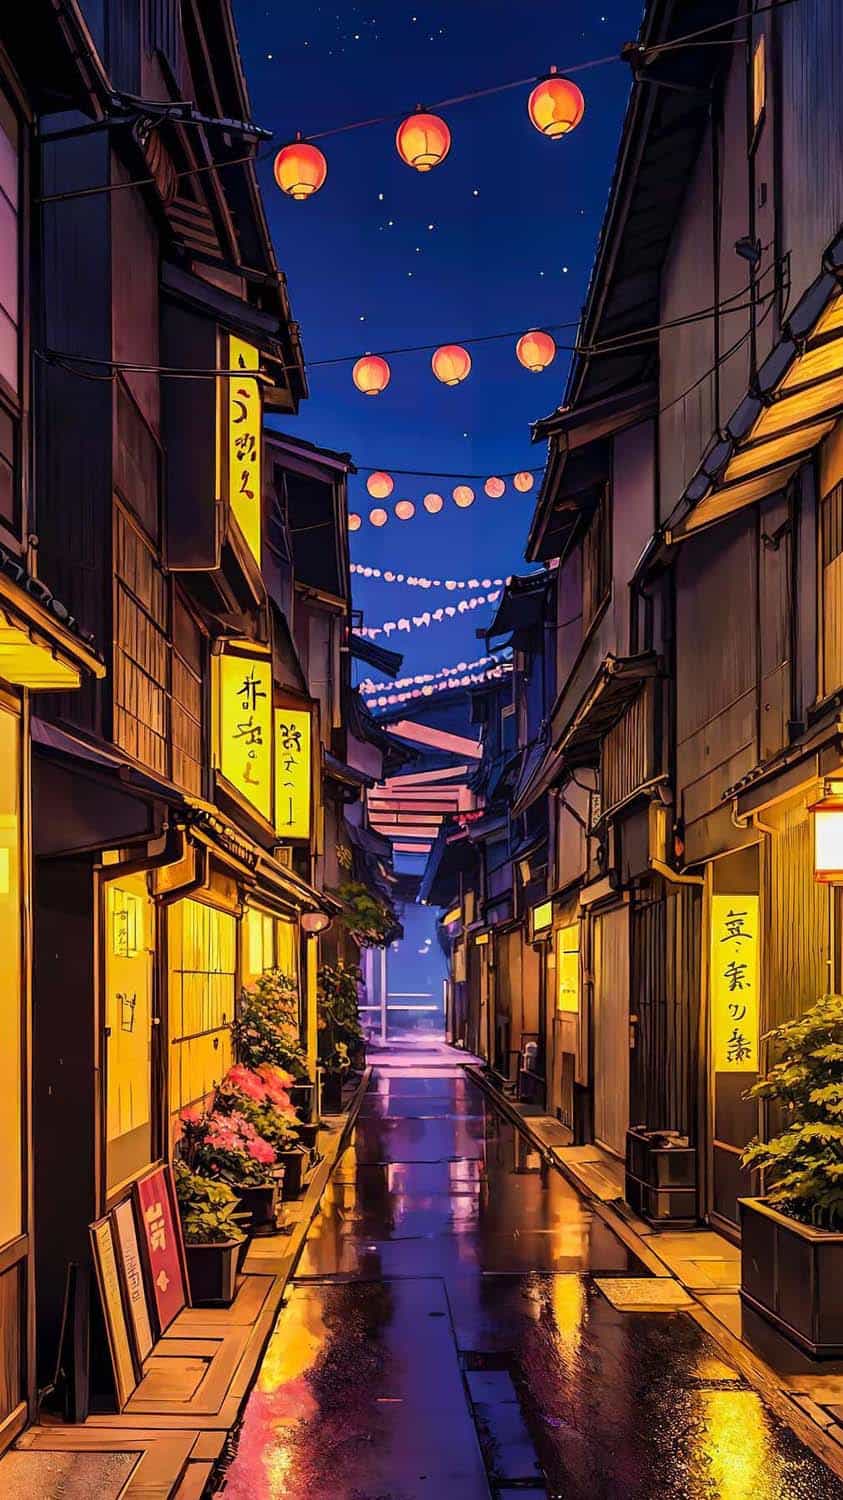 Streets of Old Japan iPhone Wallpaper HD